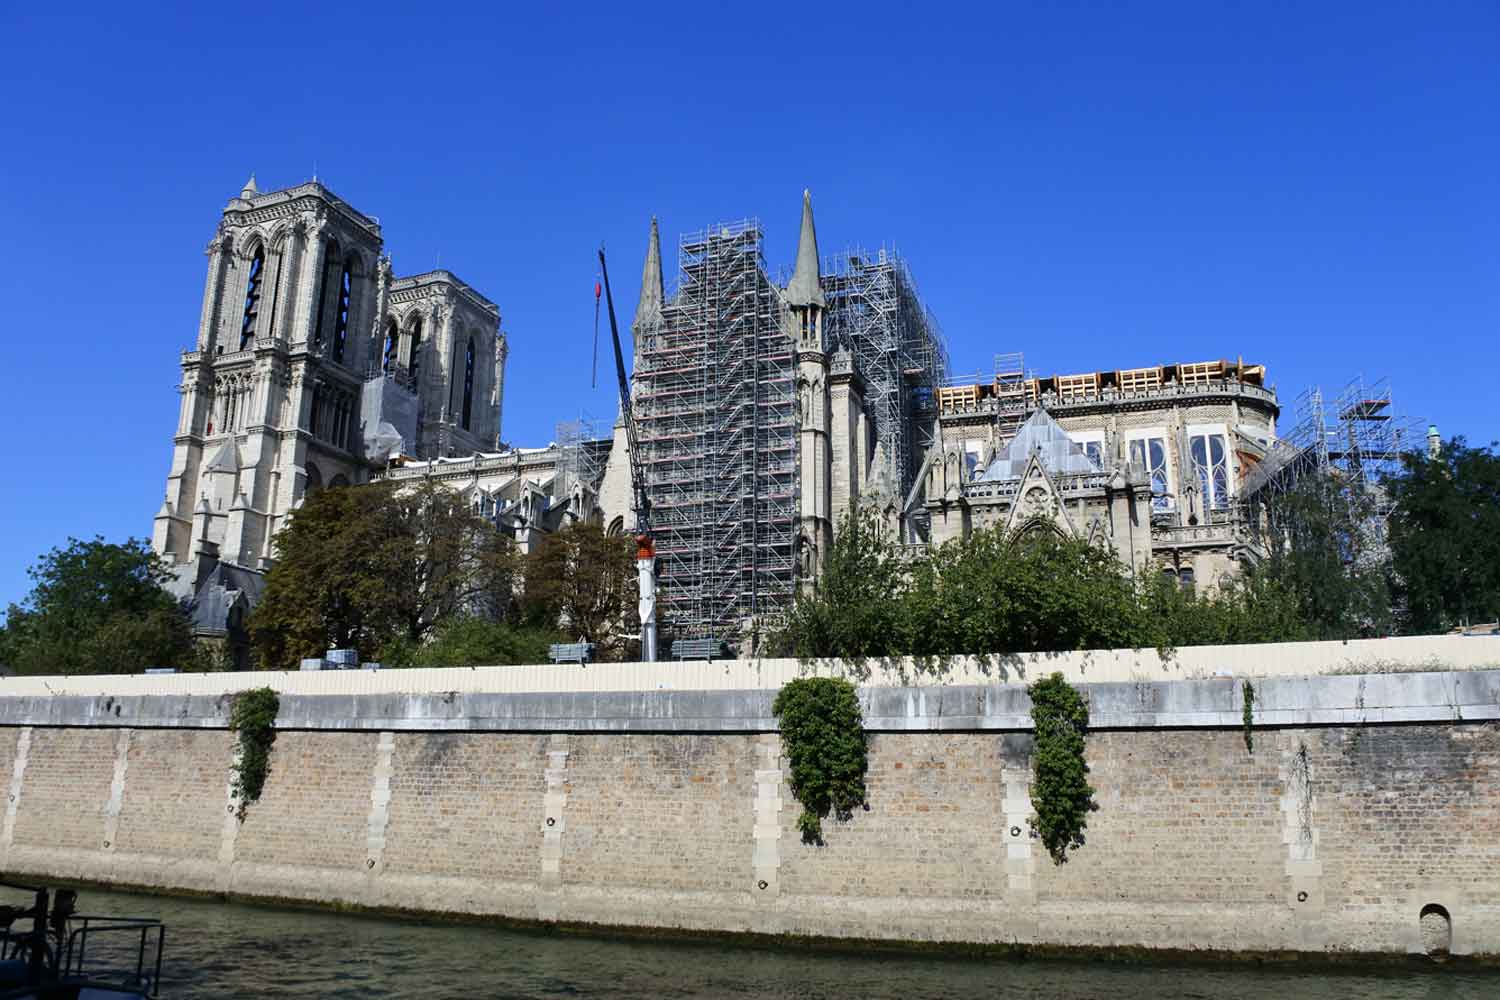 Scaffolding surrounding a large cathedral located along a river